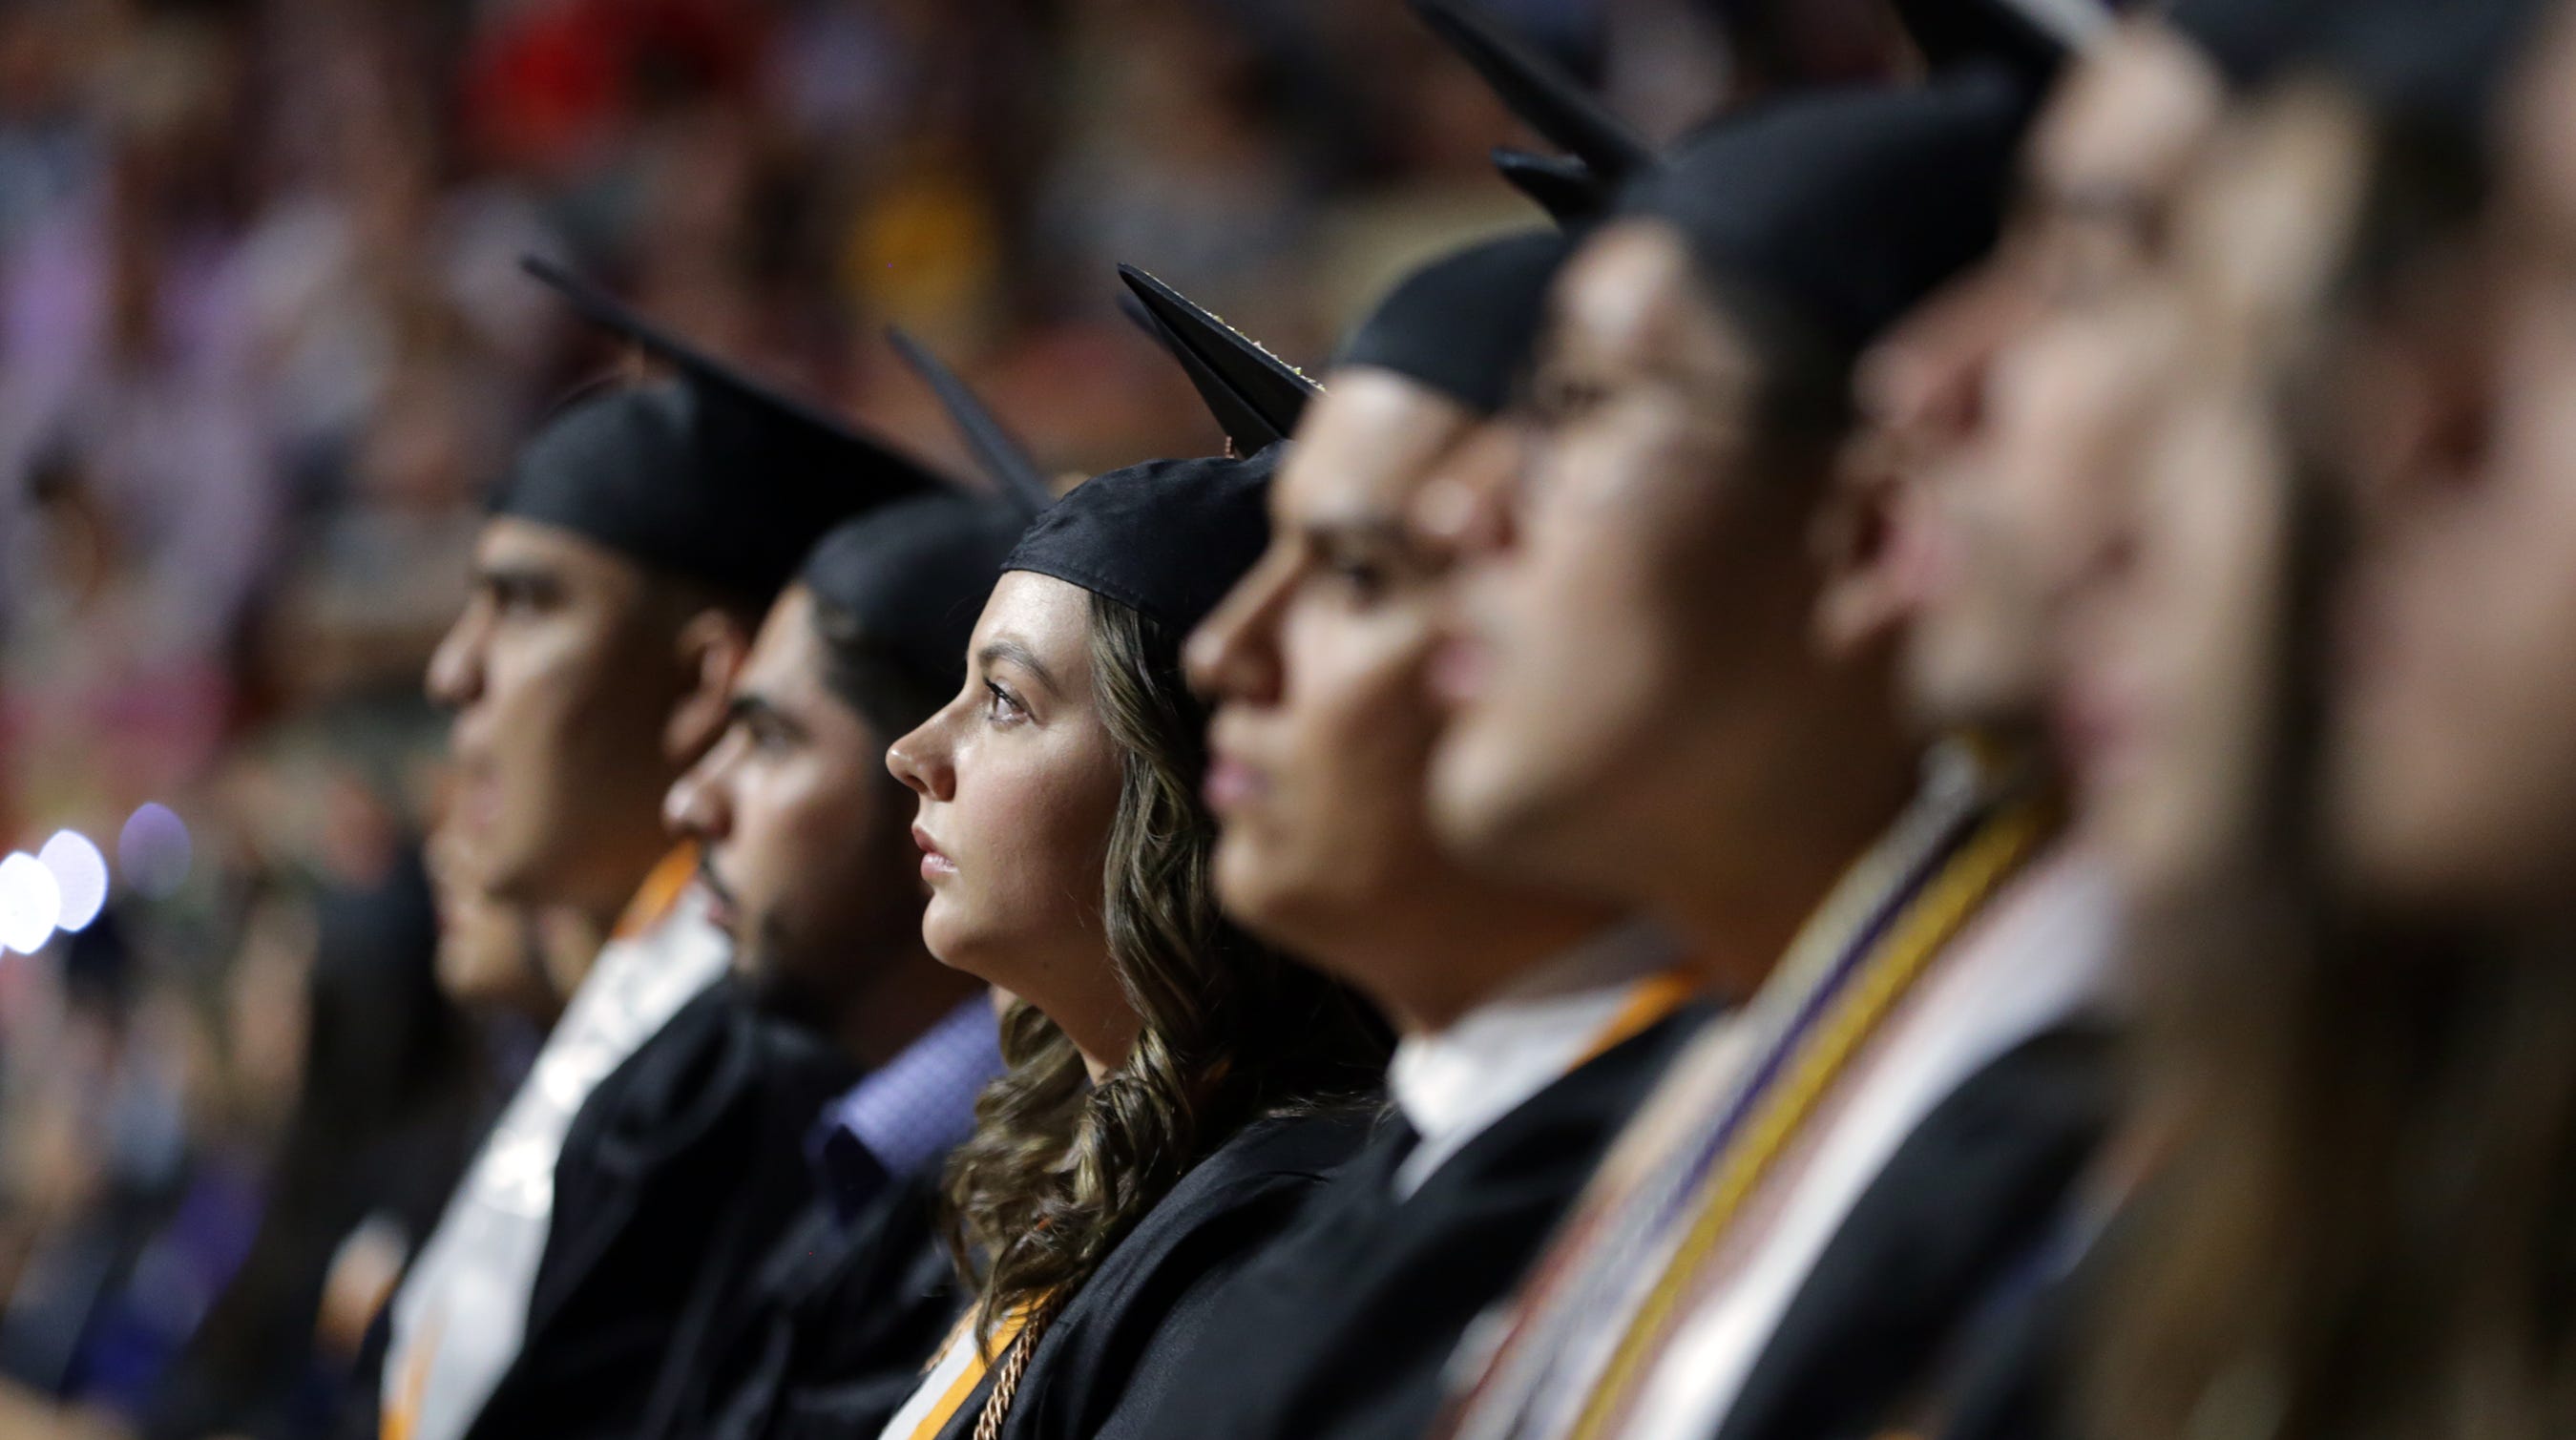 UTEP Graduates can bring 8 guests to inperson commencements in May